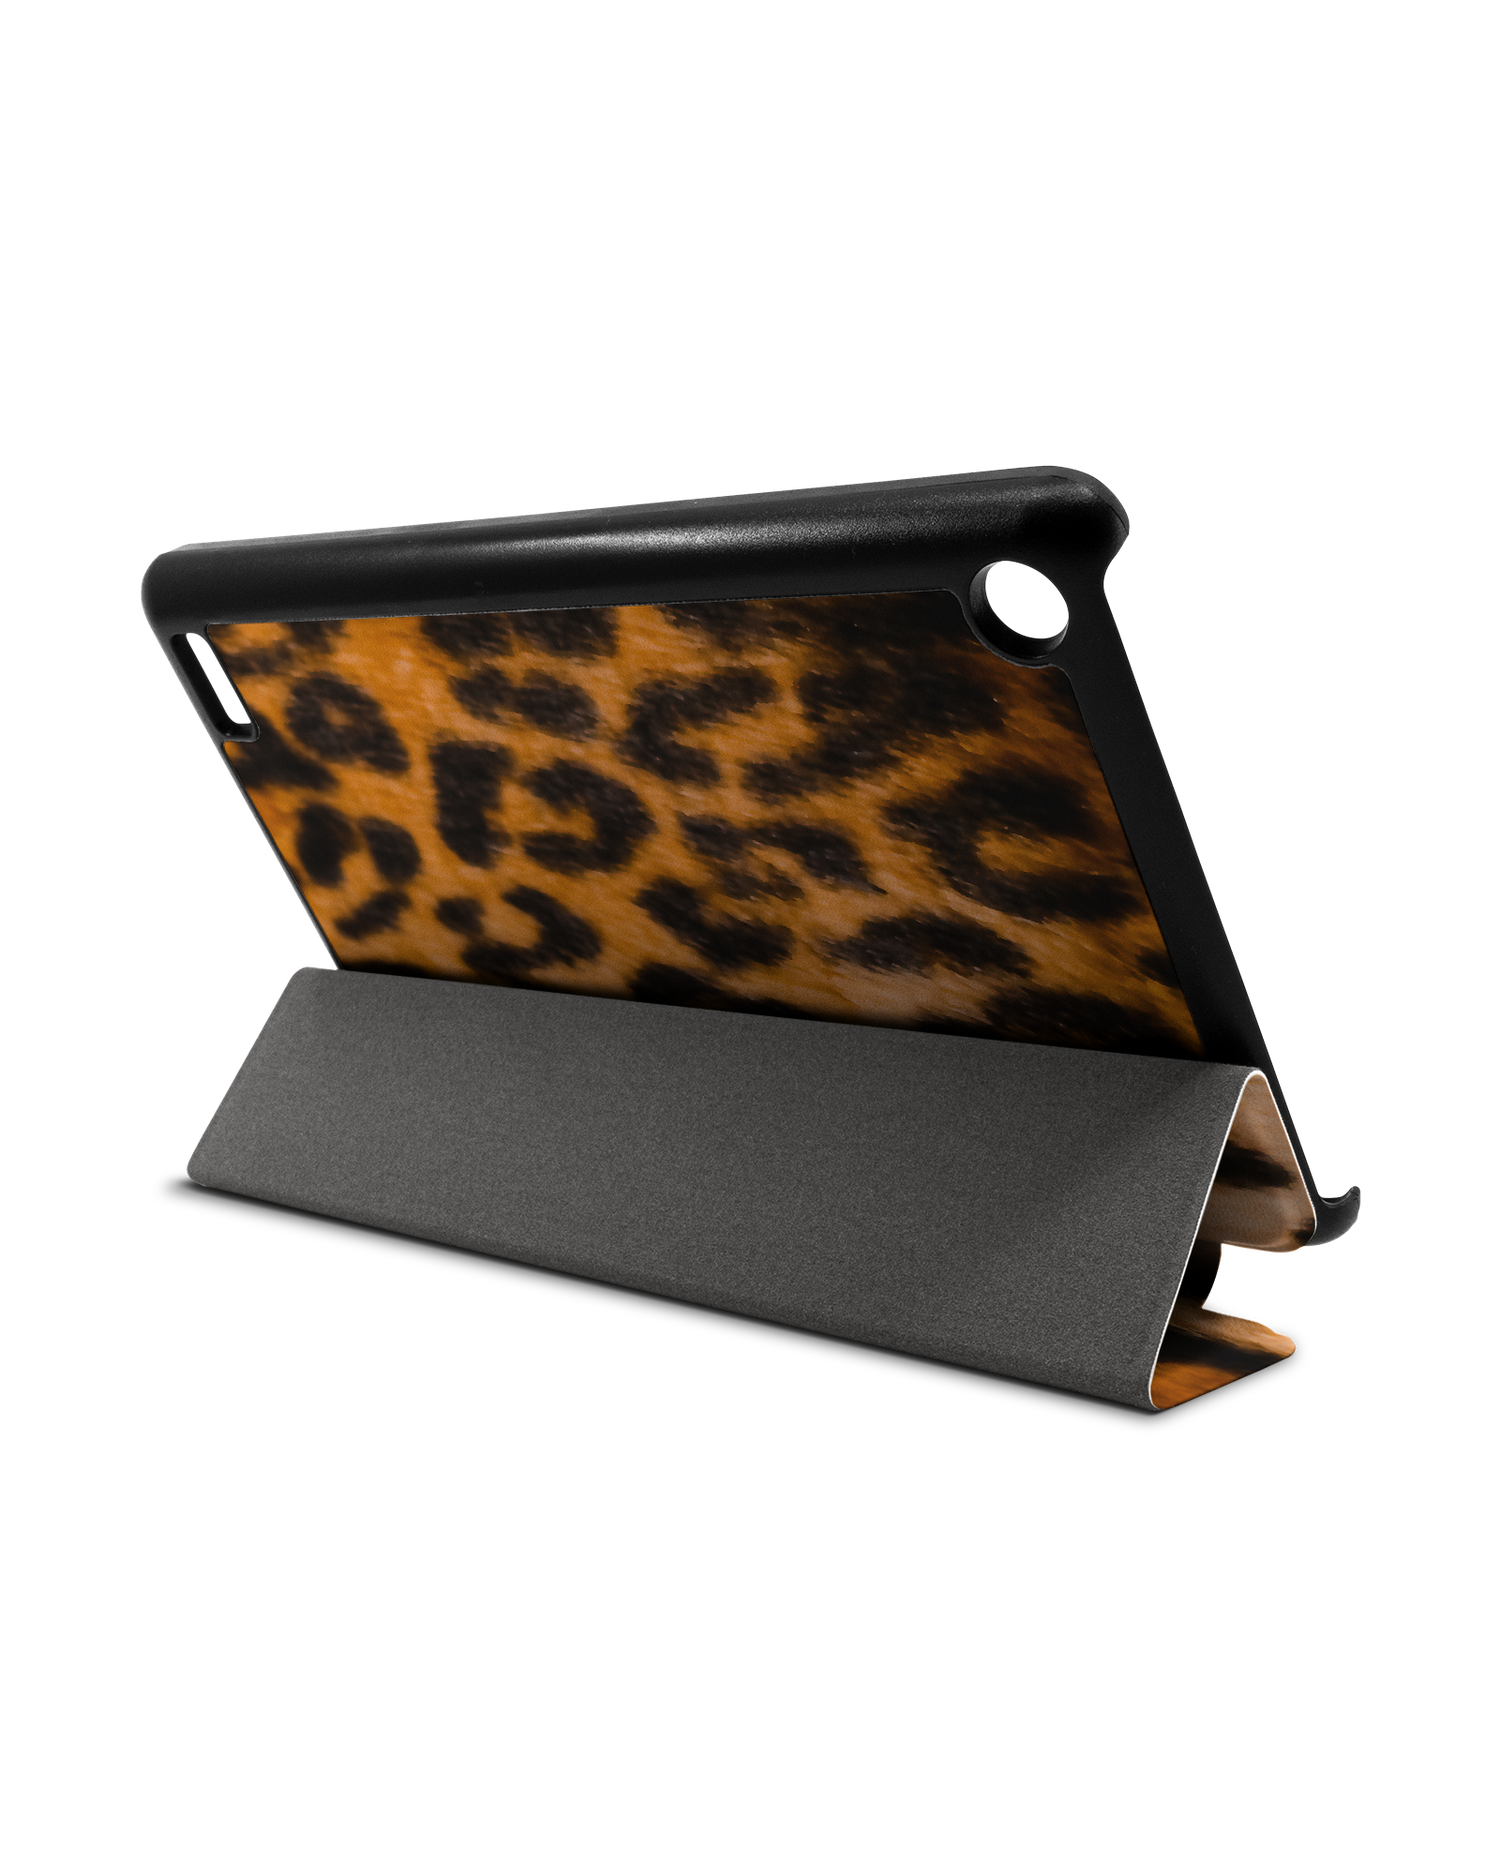 Leopard Pattern Tablet Smart Case for Amazon Fire 7: Used as Stand